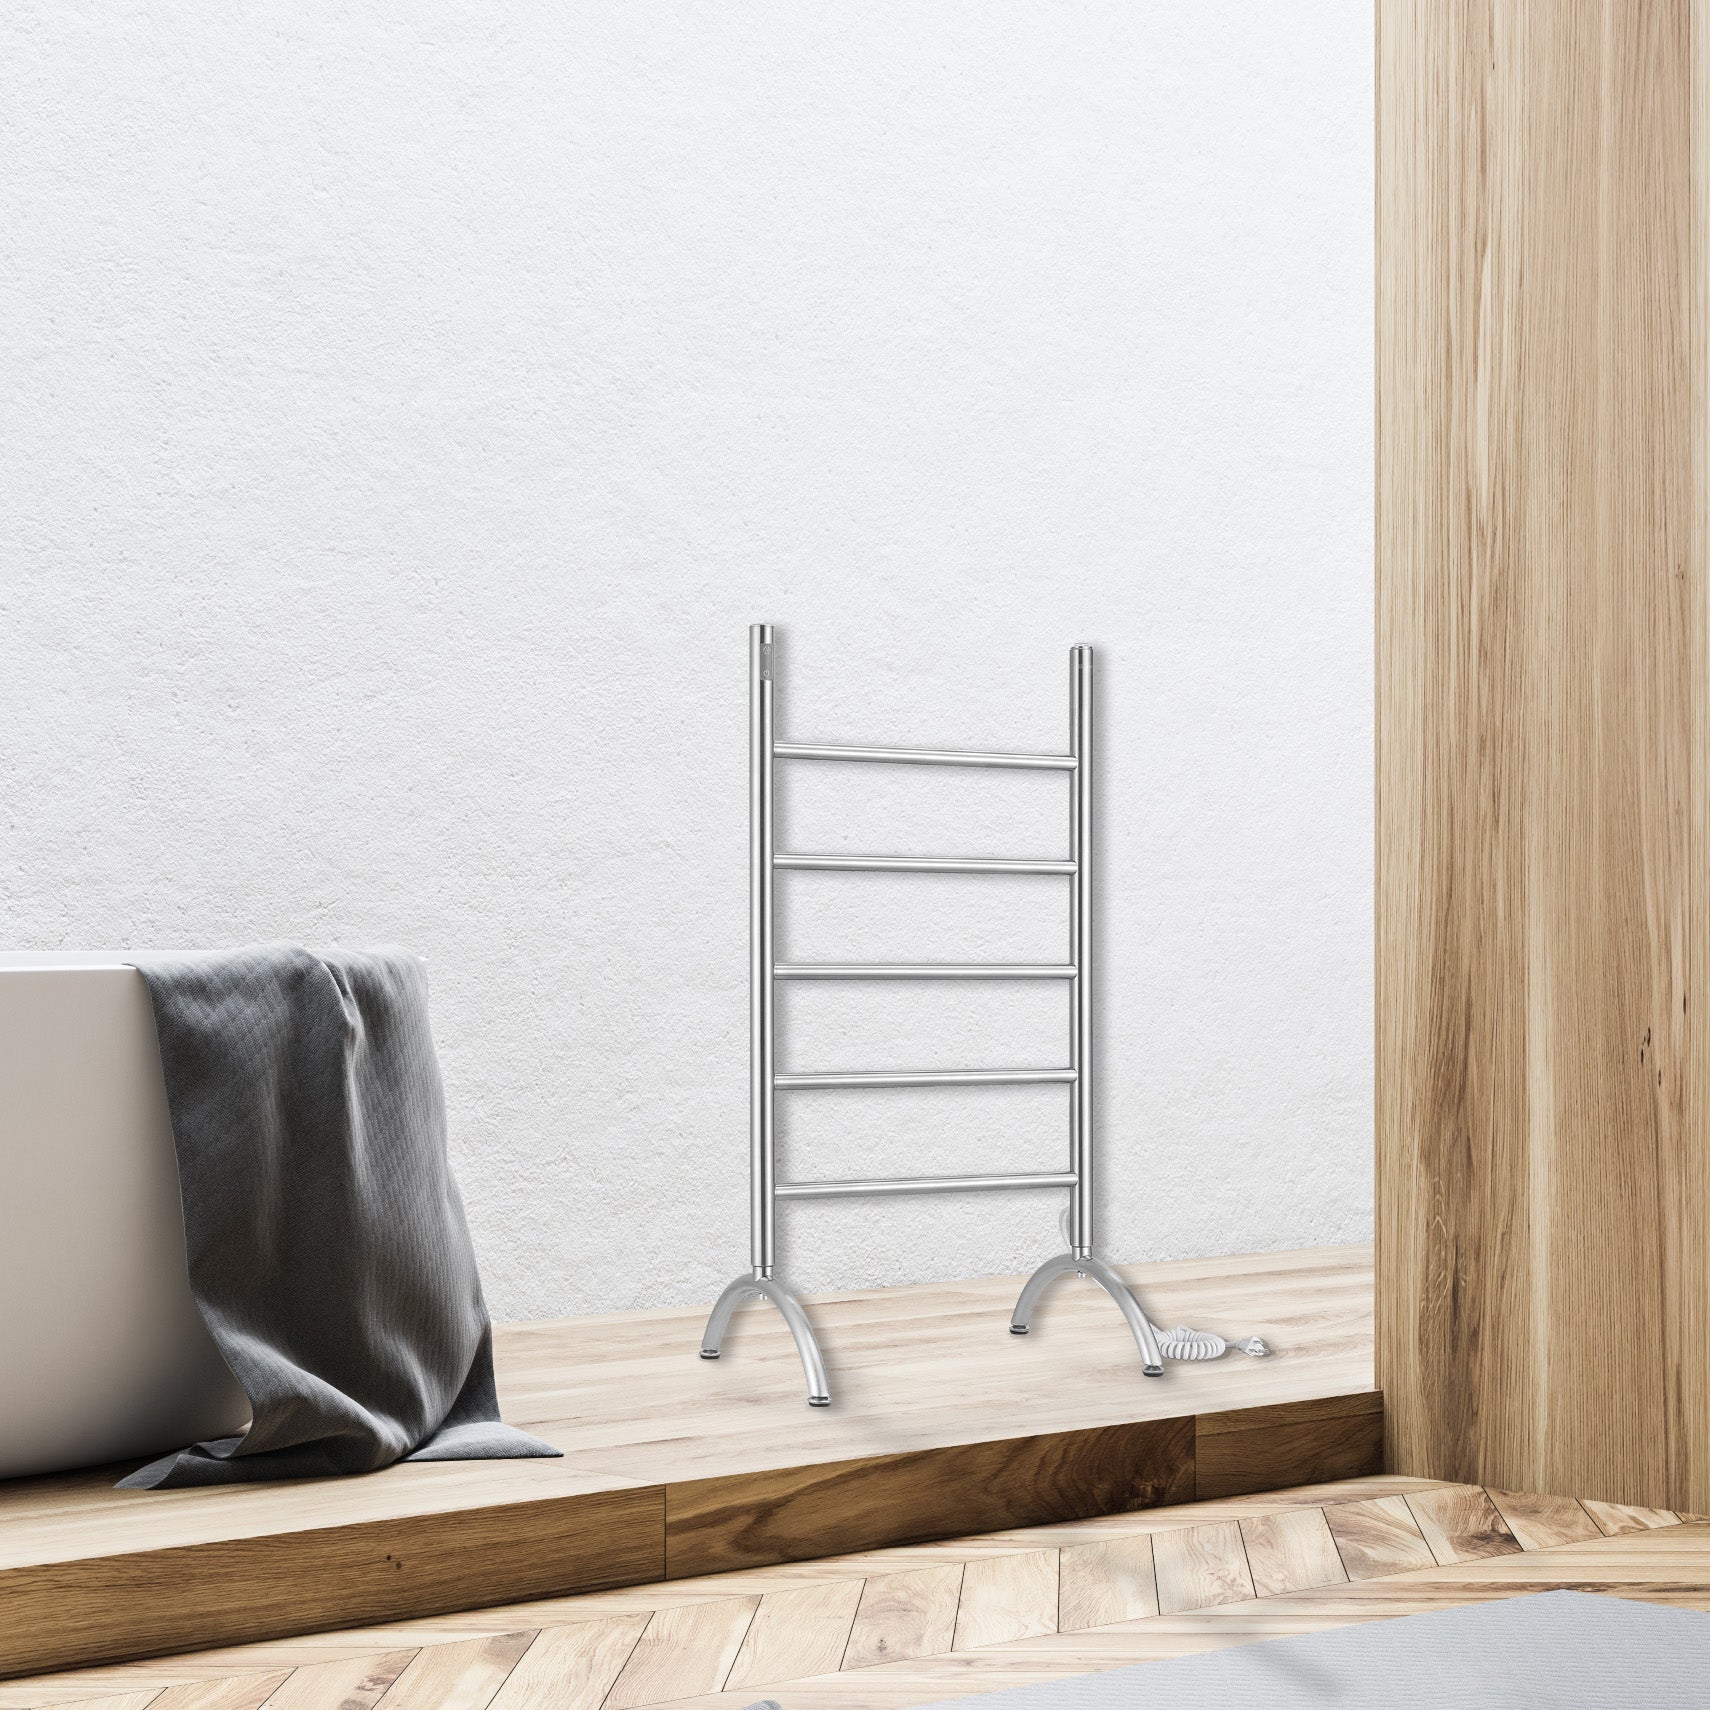 Nova OBT 3 in 1, 5 Bar Towel Warmer with Integrated On-Board Timer in Brushed Stainless Steel